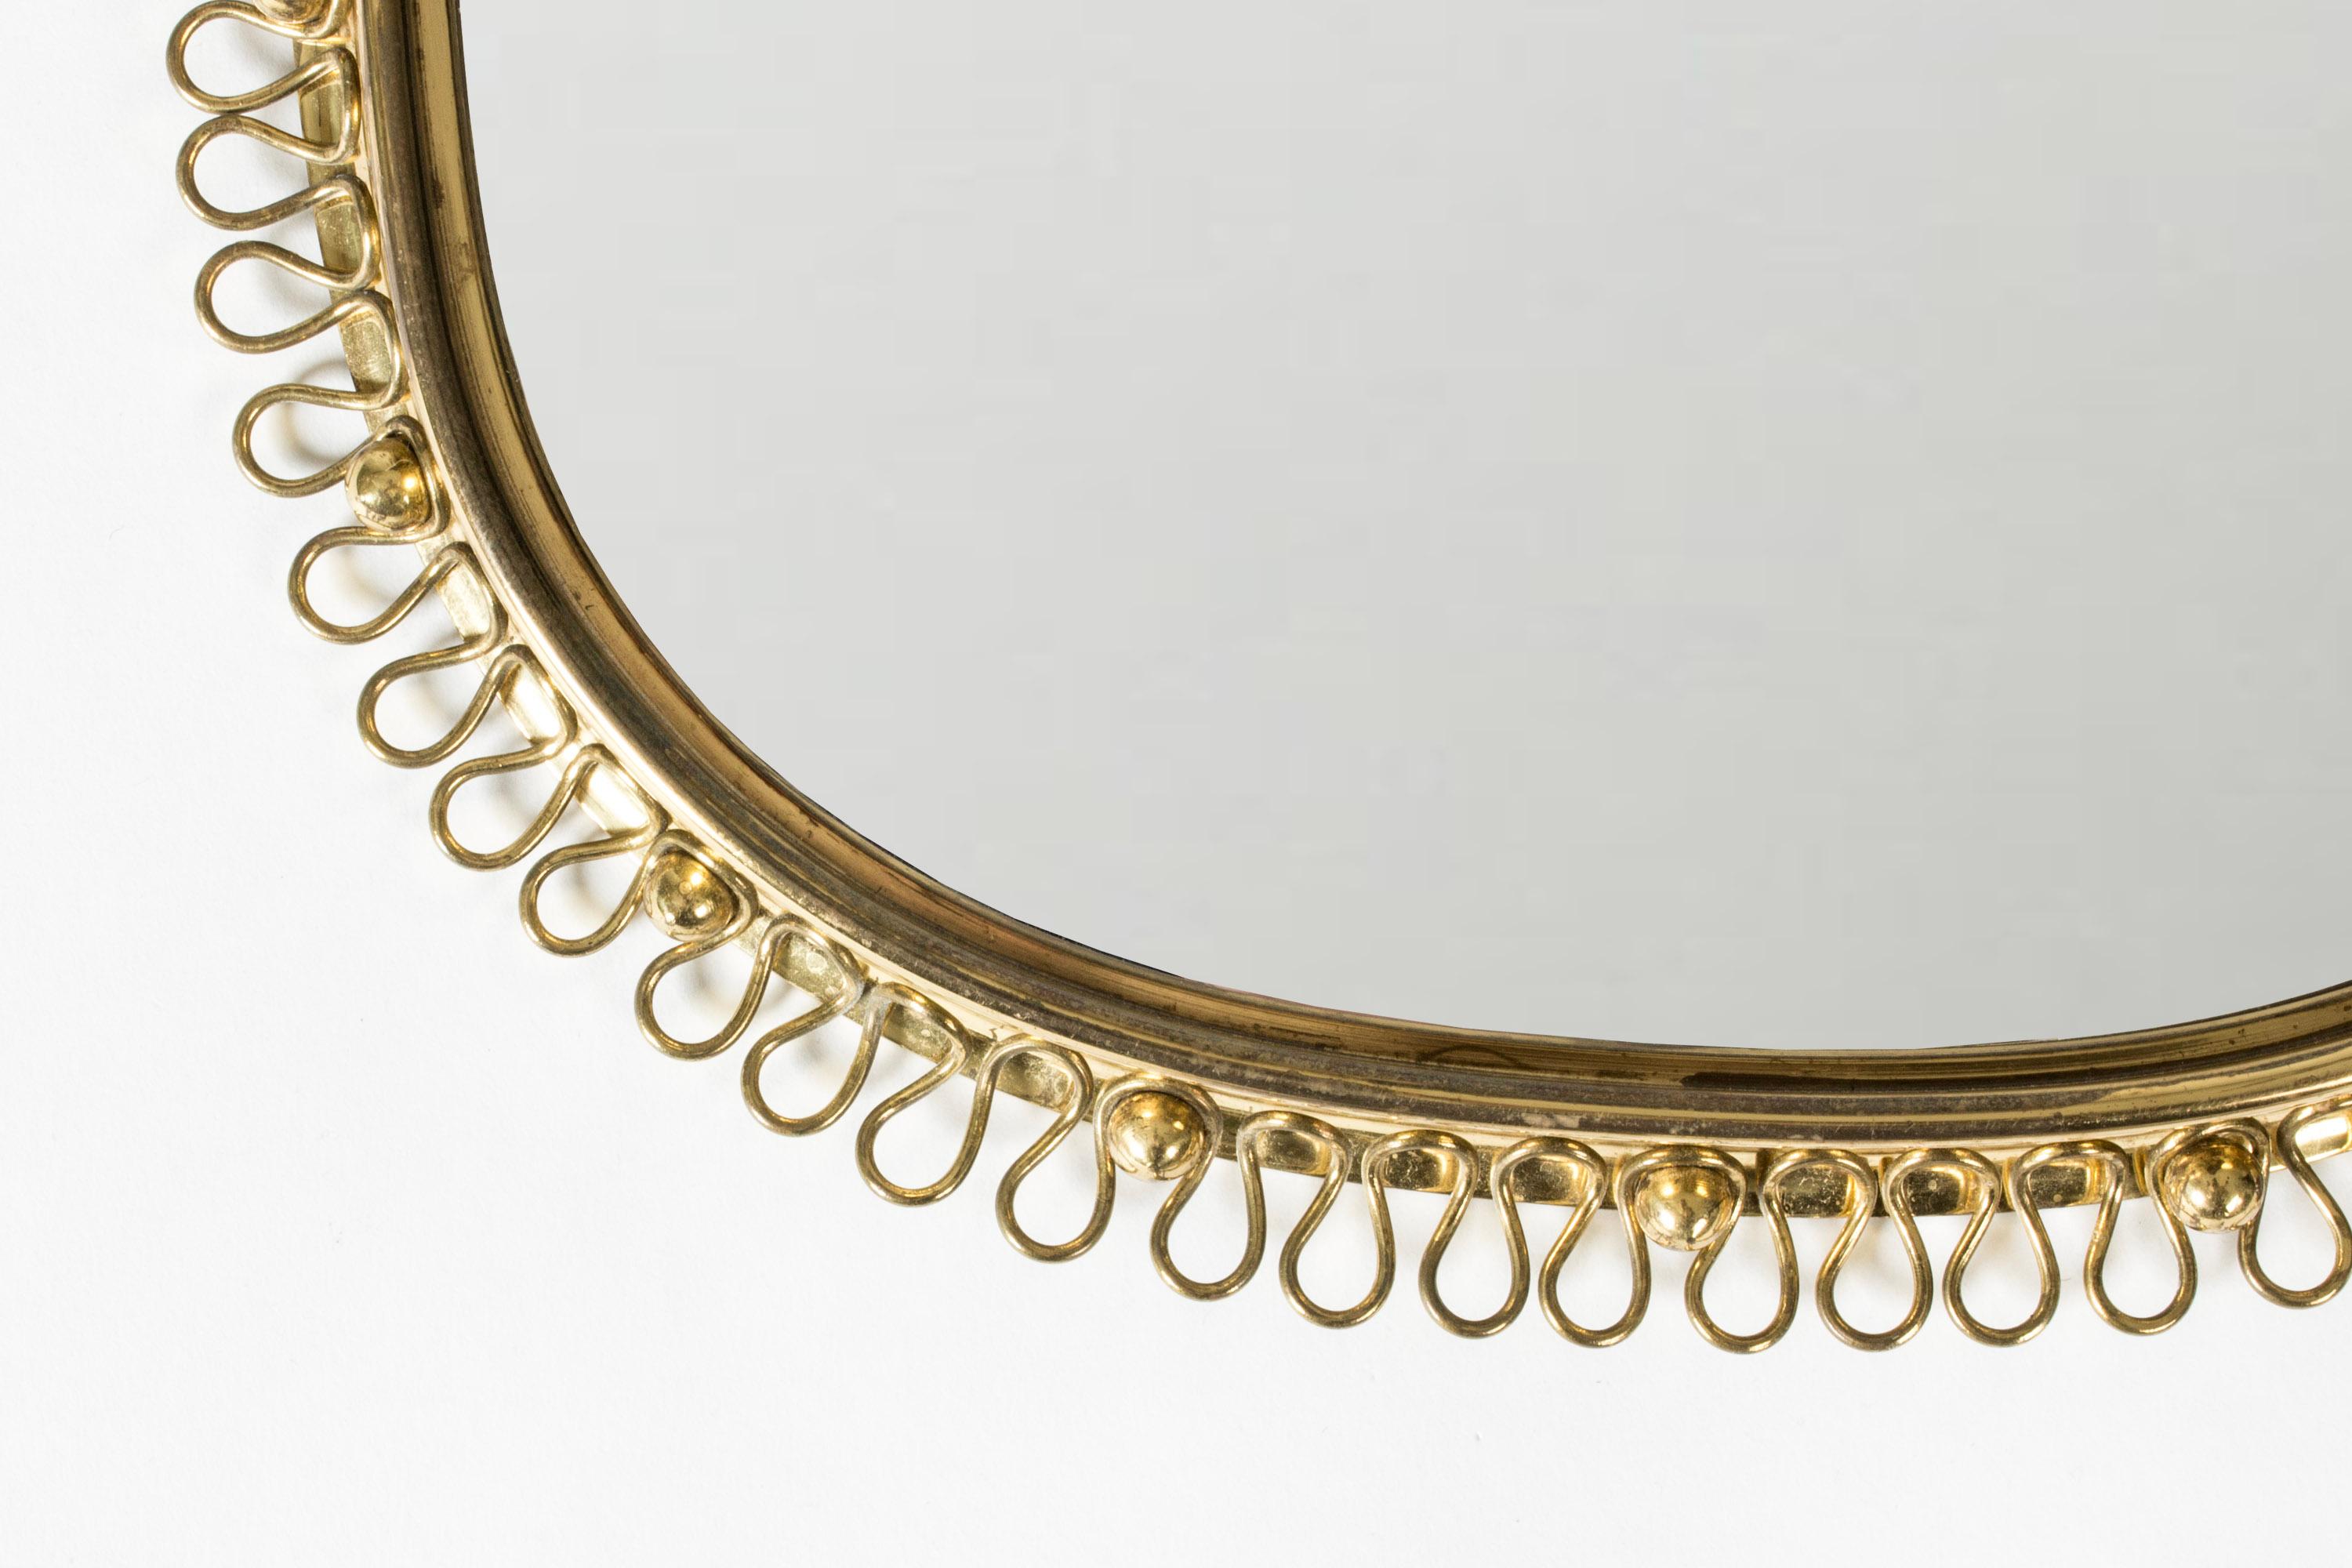 Beautiful Swedish Modern wall mirror, made from brass. Scalloped edge brass rim, decorative hoop for suspension.